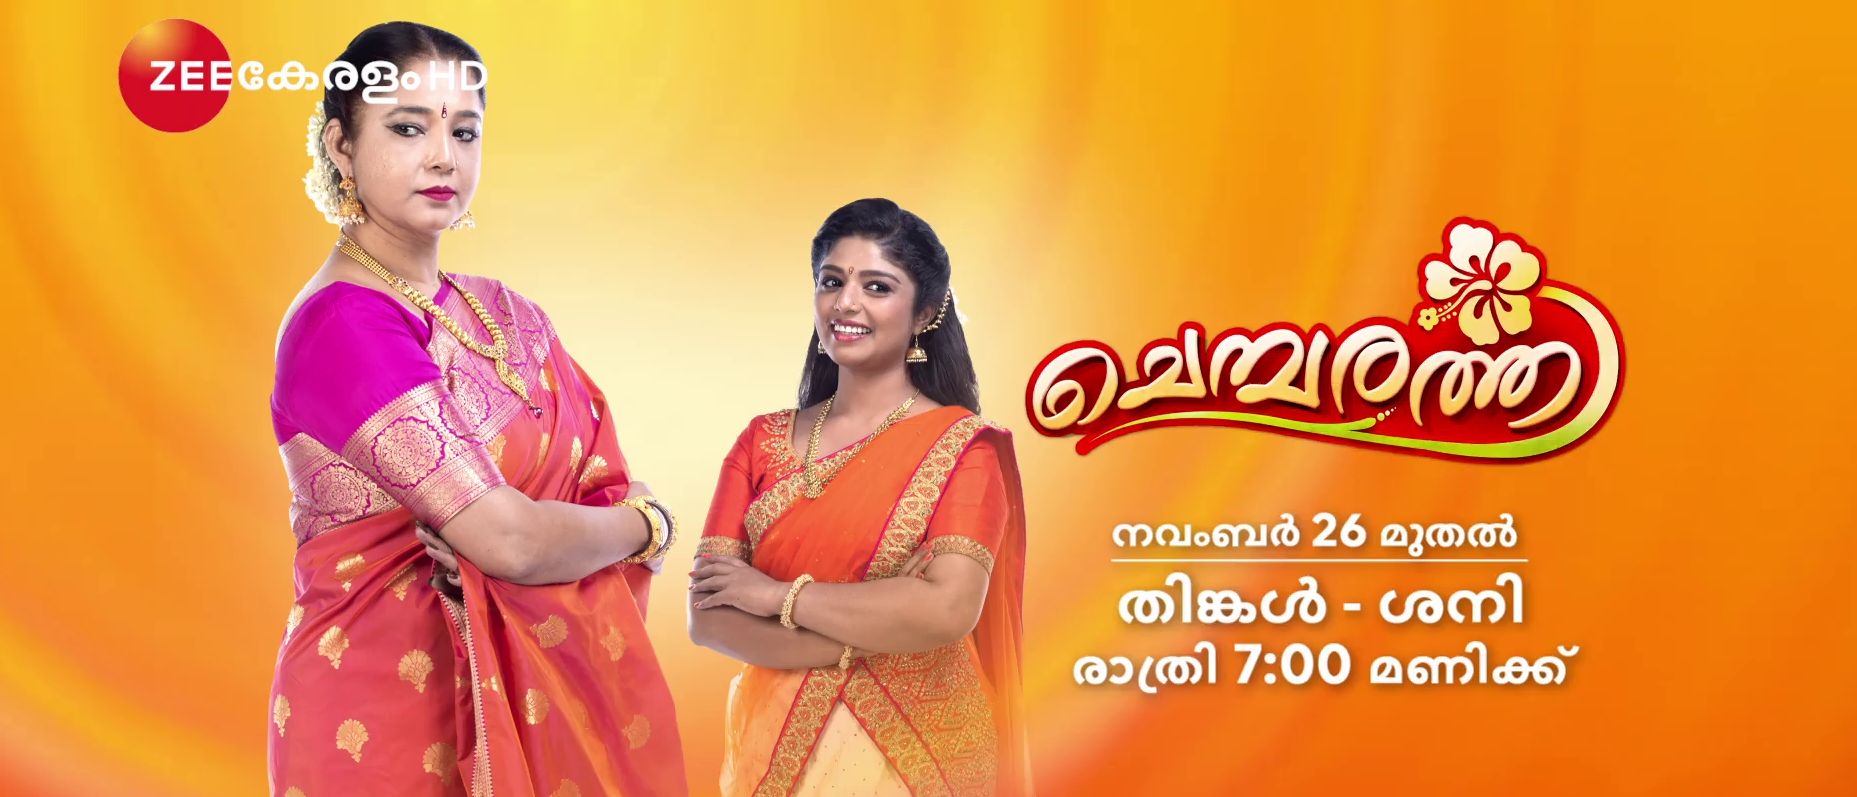 Zee Keralam TRP - Serials, Reality Shows And Movie Ratings